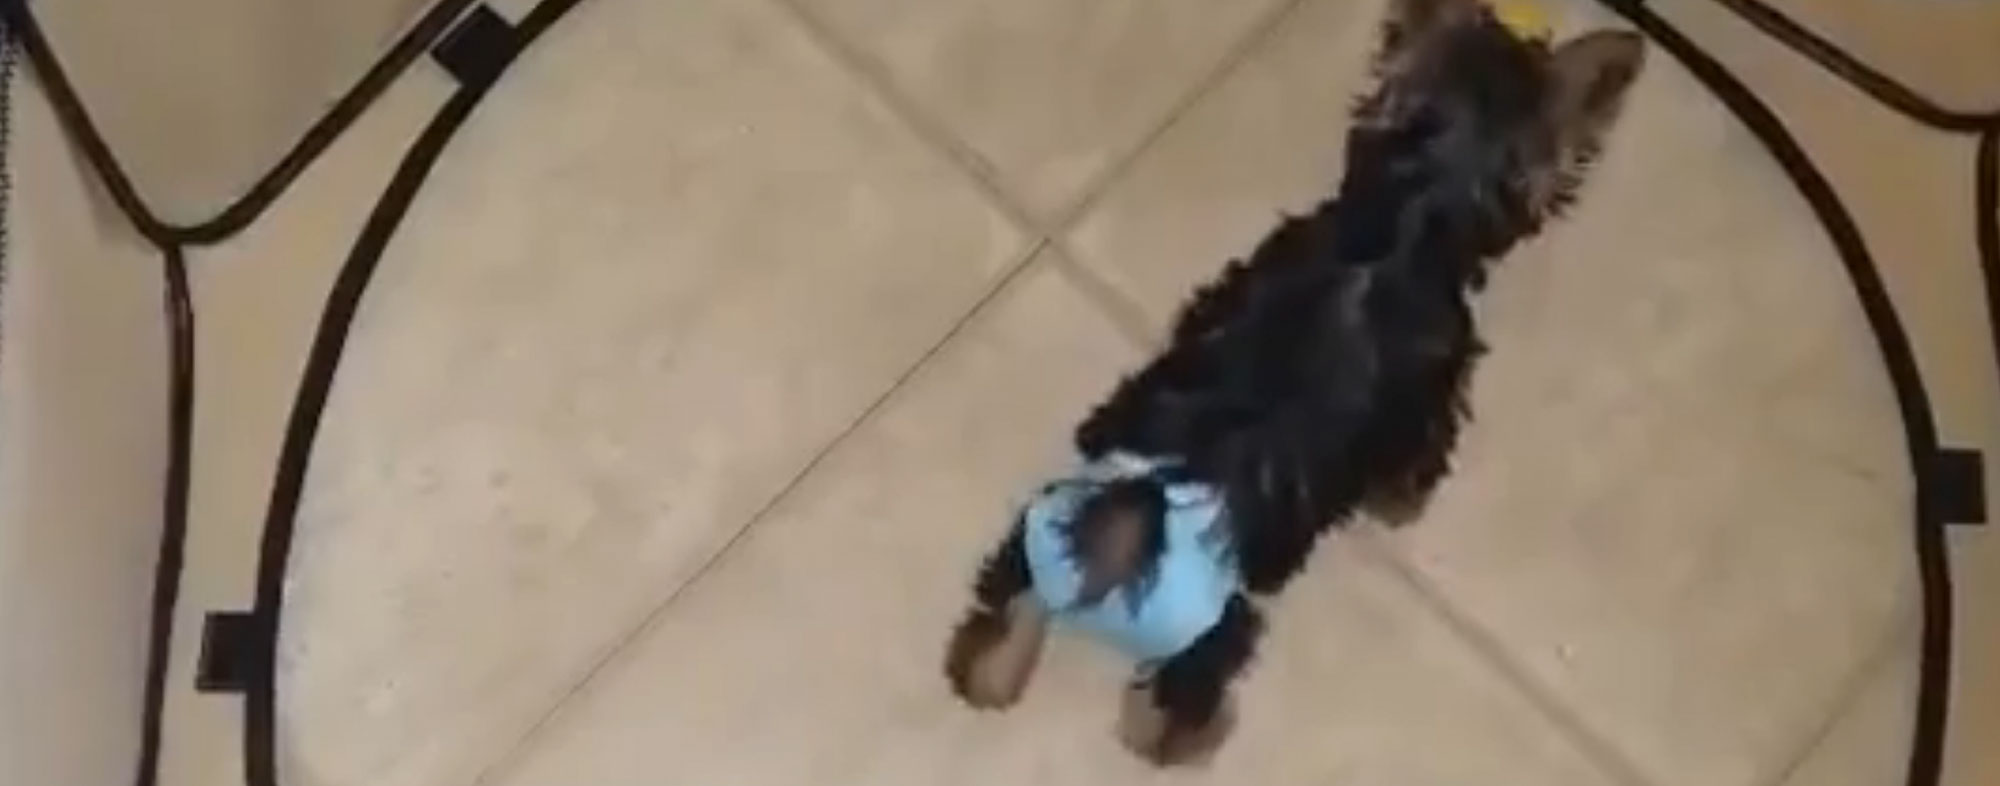 You can improvise doggy diapers for your older dogs